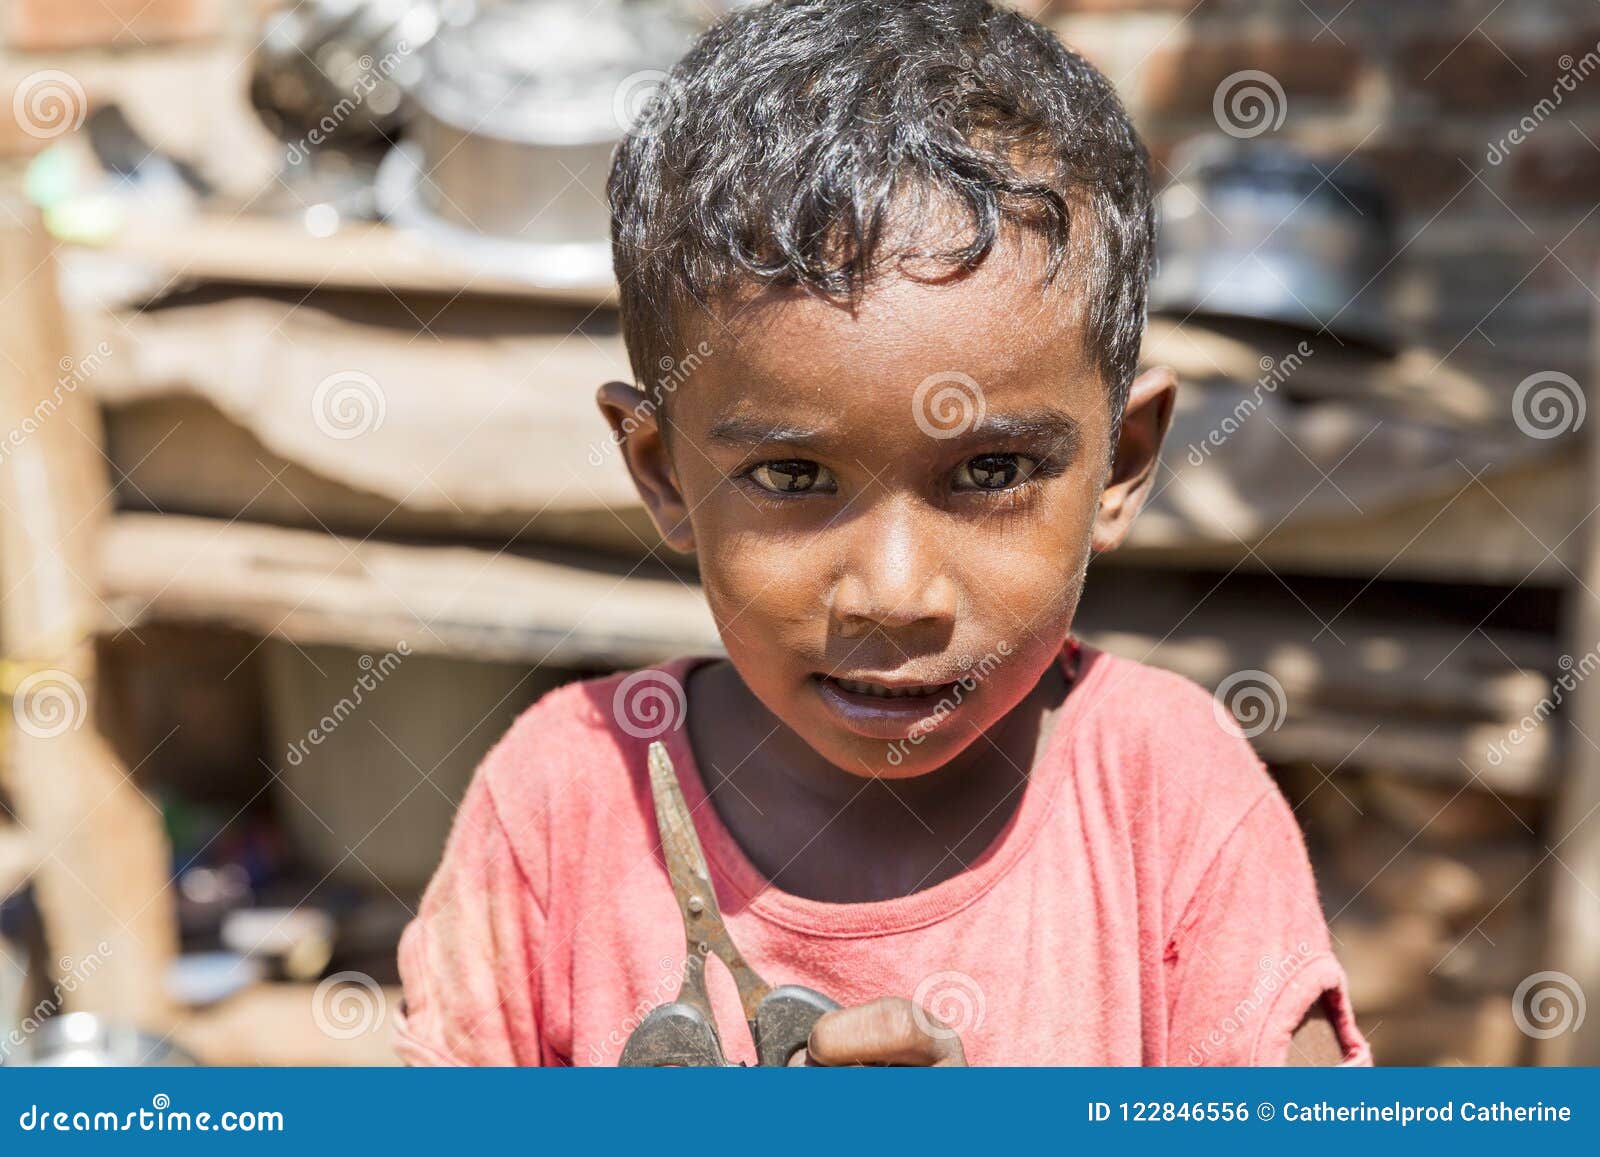 Portrait of Unidentified Indian Poor Kid Boy is Smiling Outddor in the ...